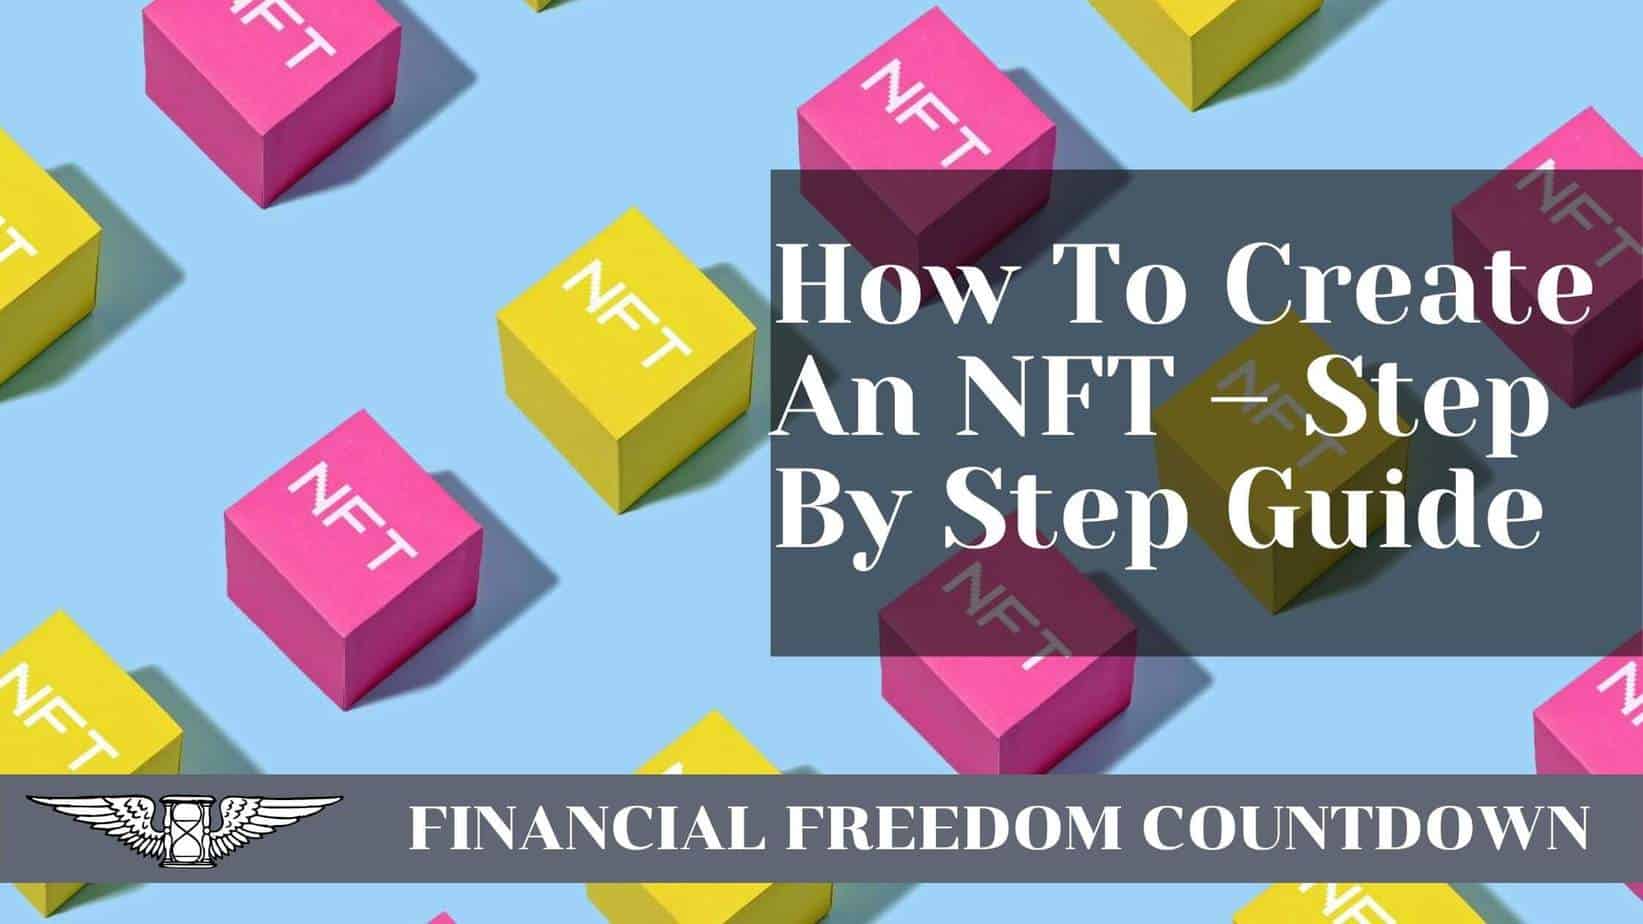 How To Create An NFT – Step By Step Guide